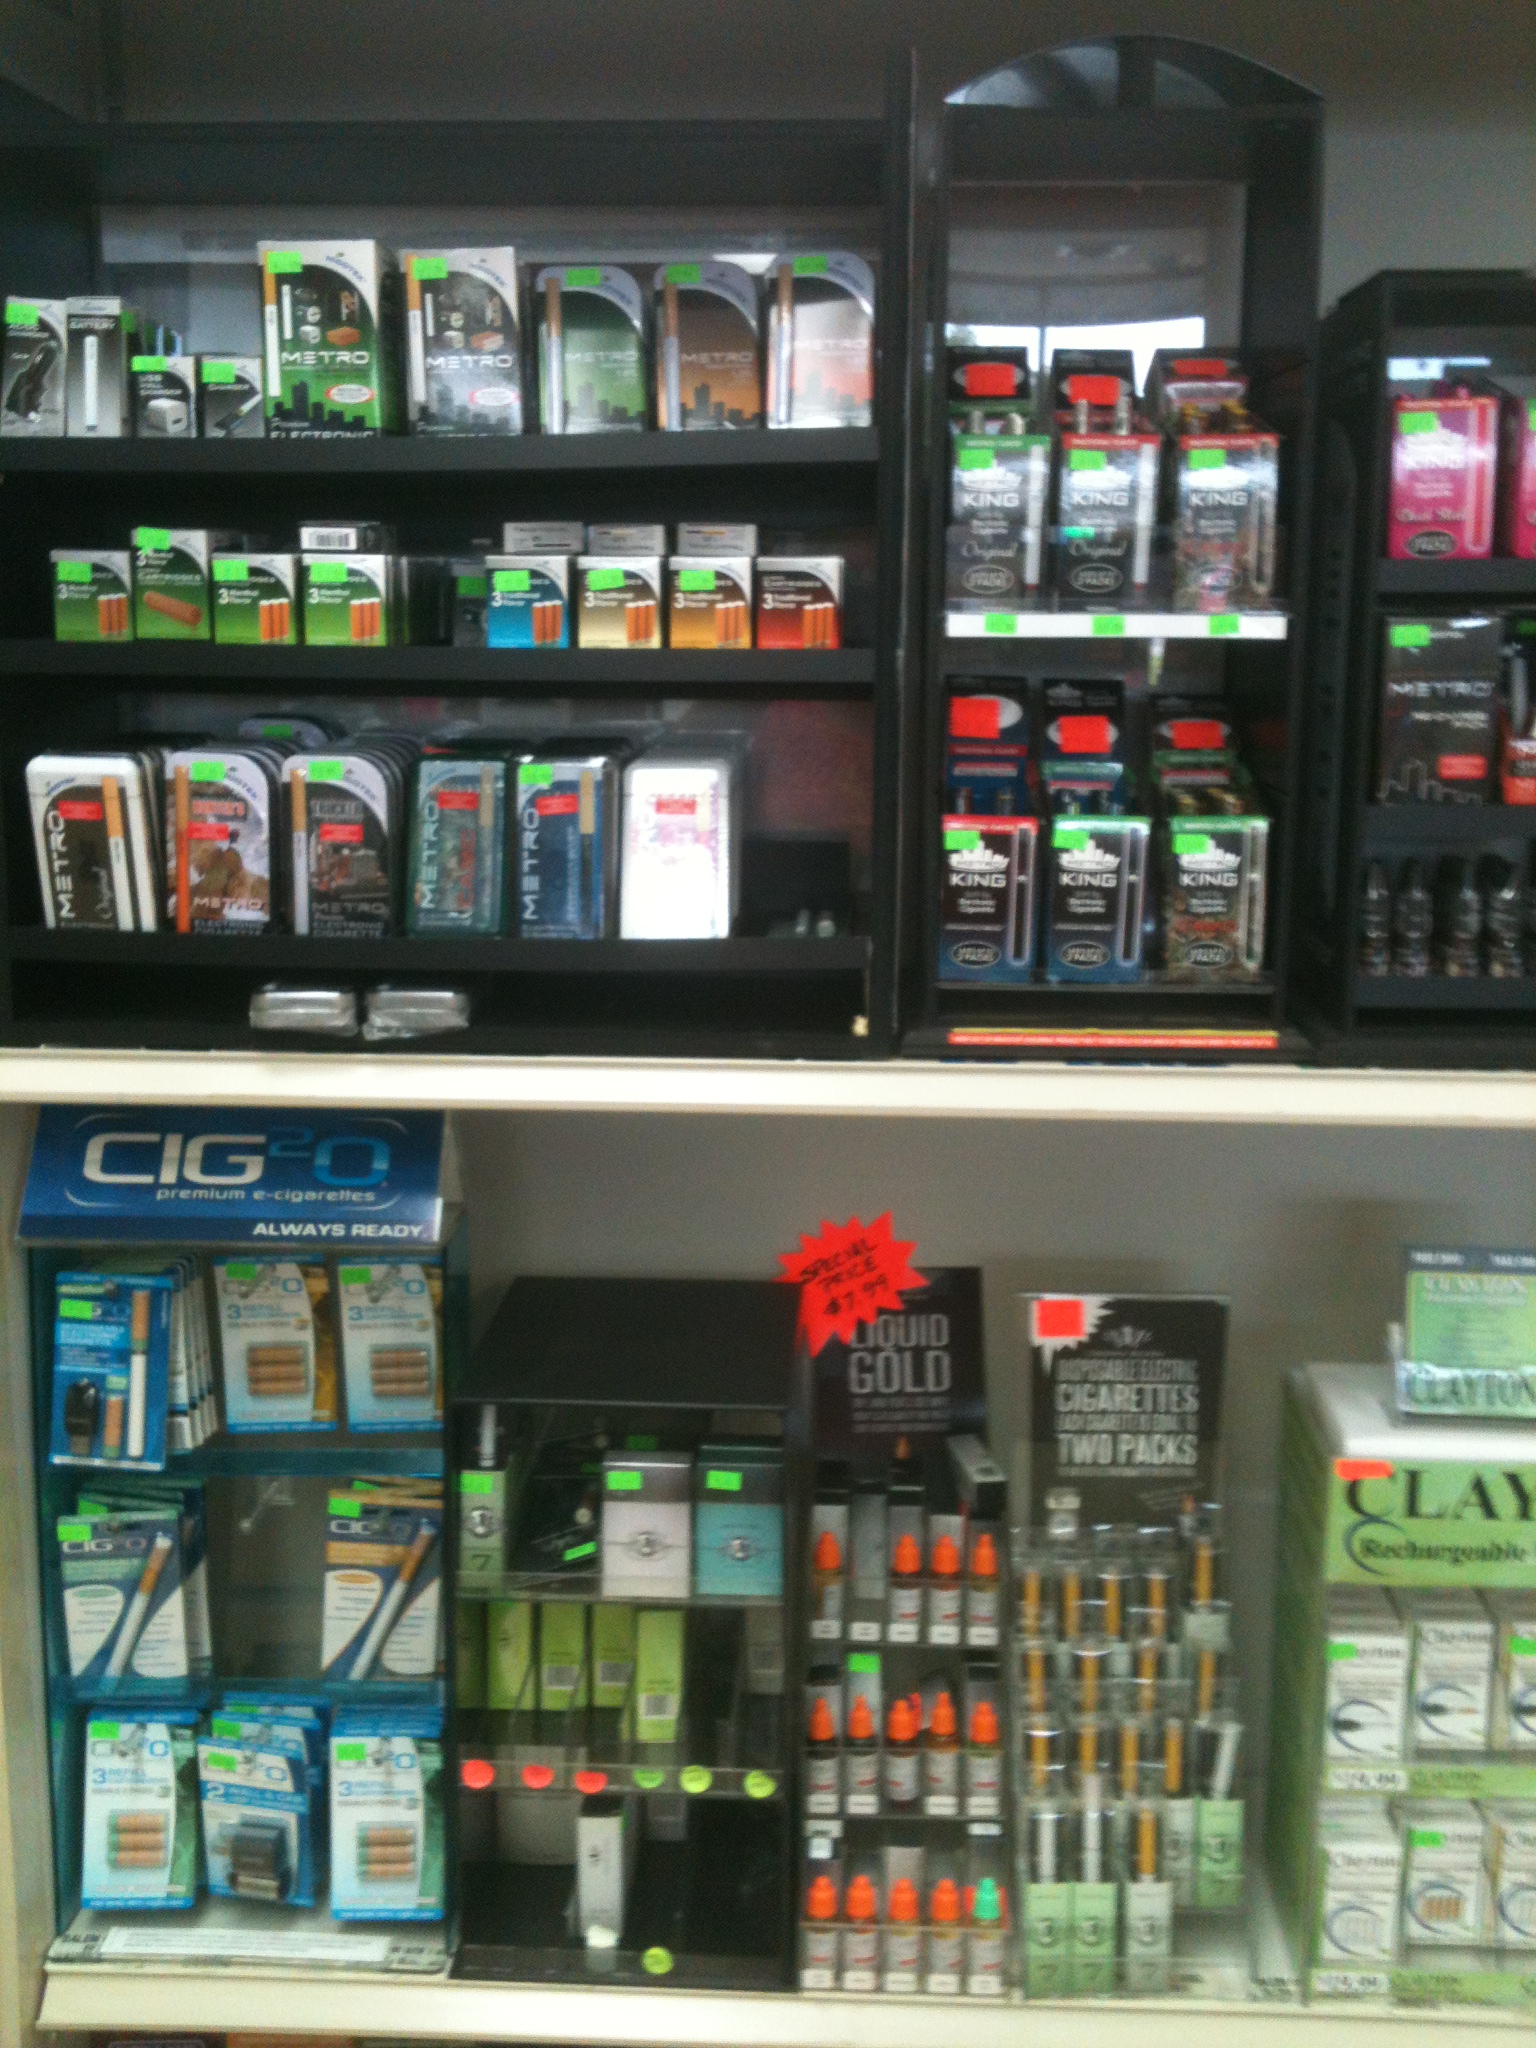 Wide Variety Of Electronic Cigarettes